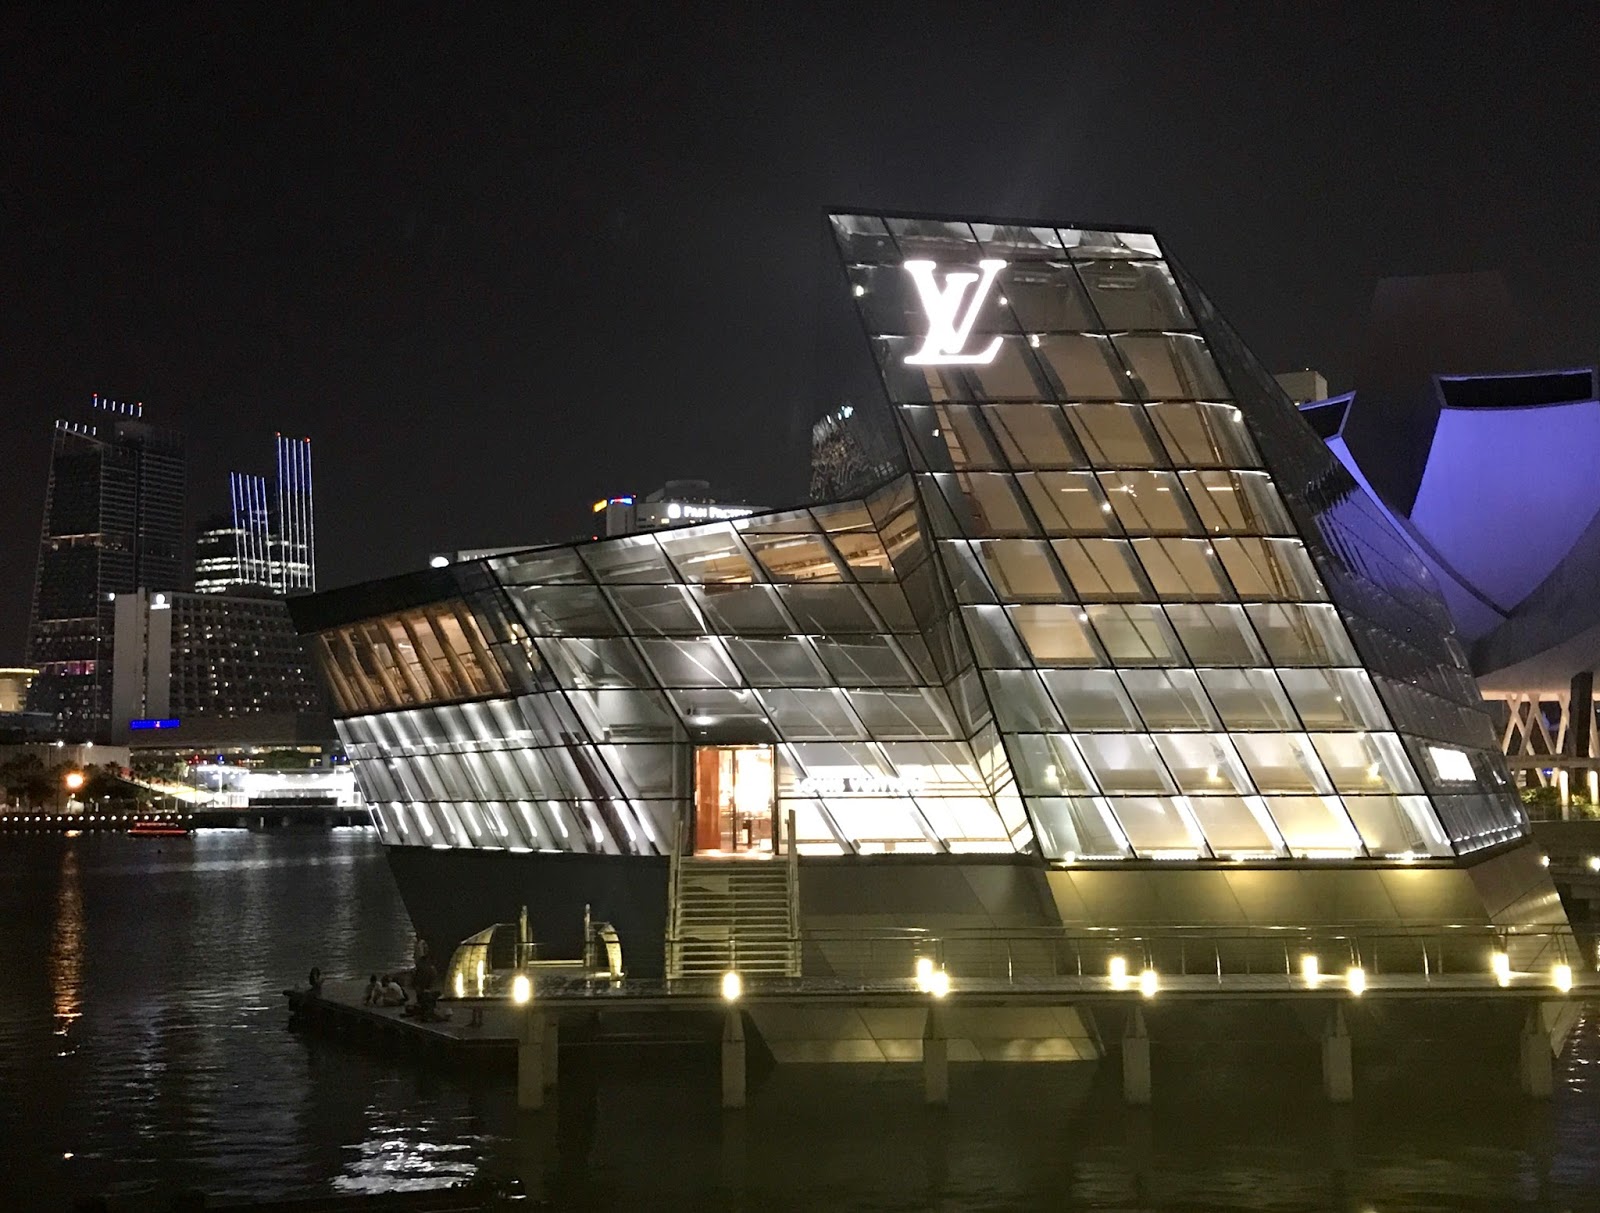 A night at the Louis Vuitton Maison